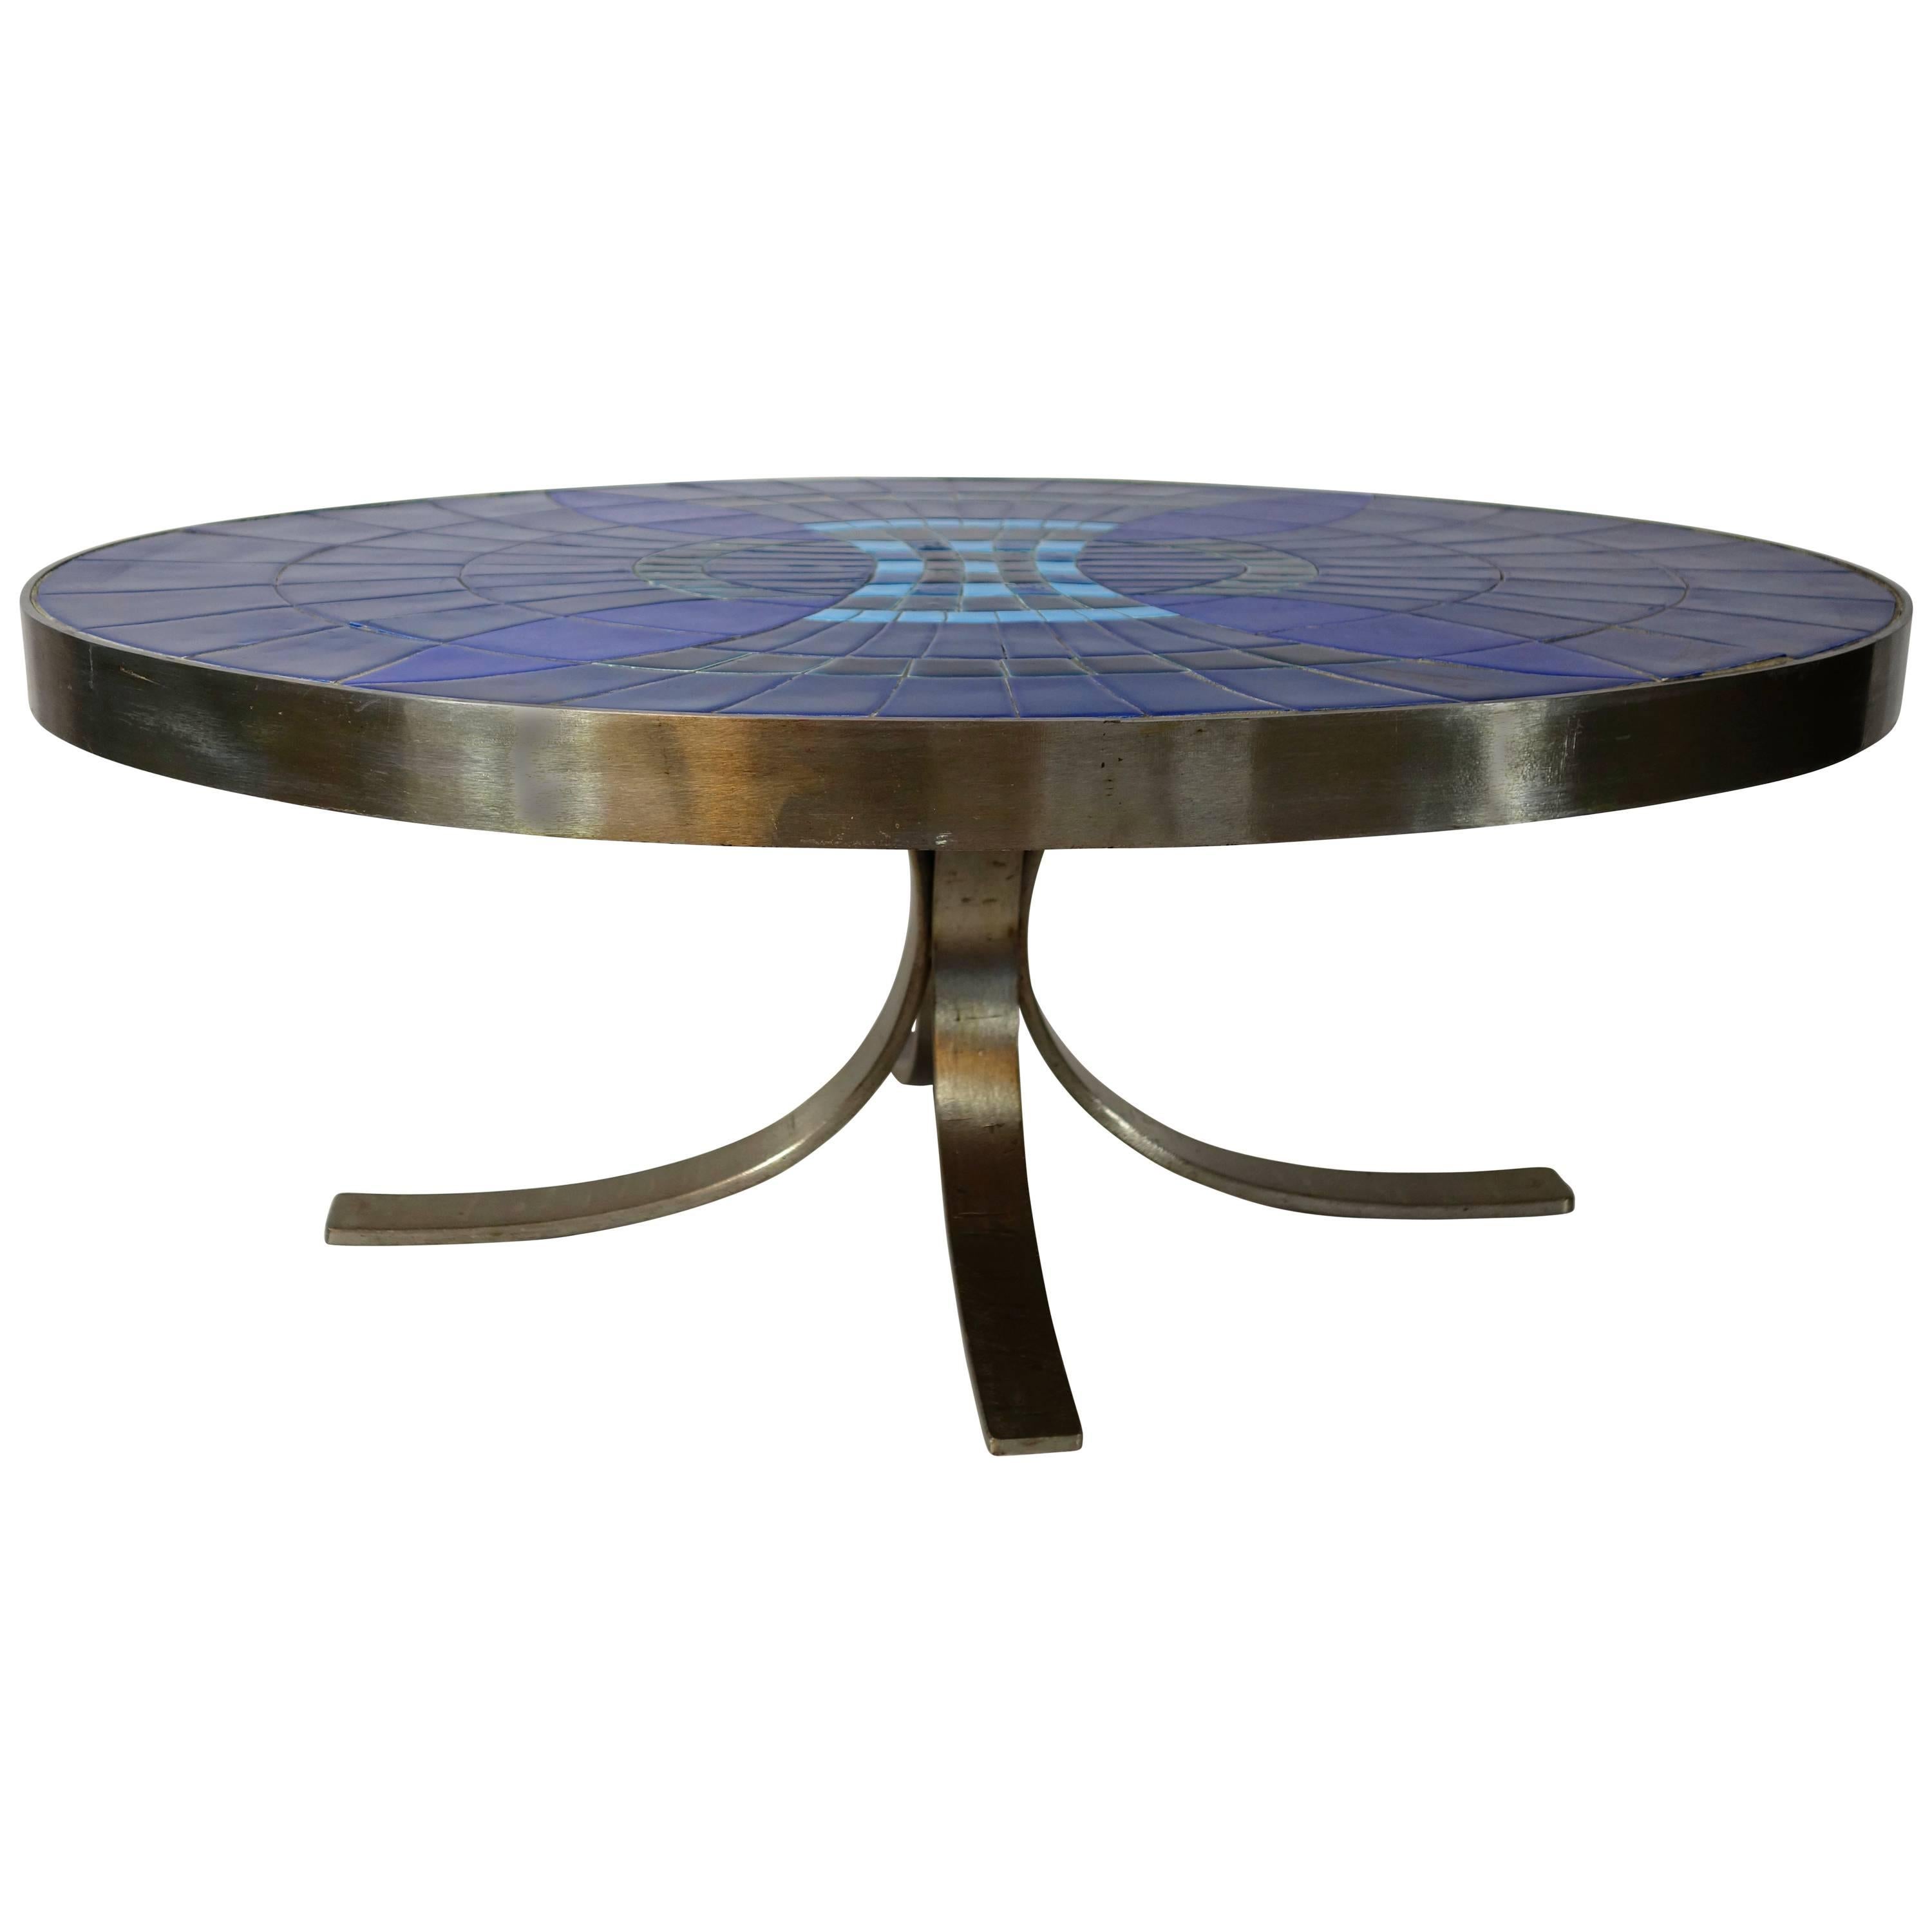 Midcentury Oval Steel Frame Cocktail or Coffee Table with blue tiles Guy Trévoux For Sale